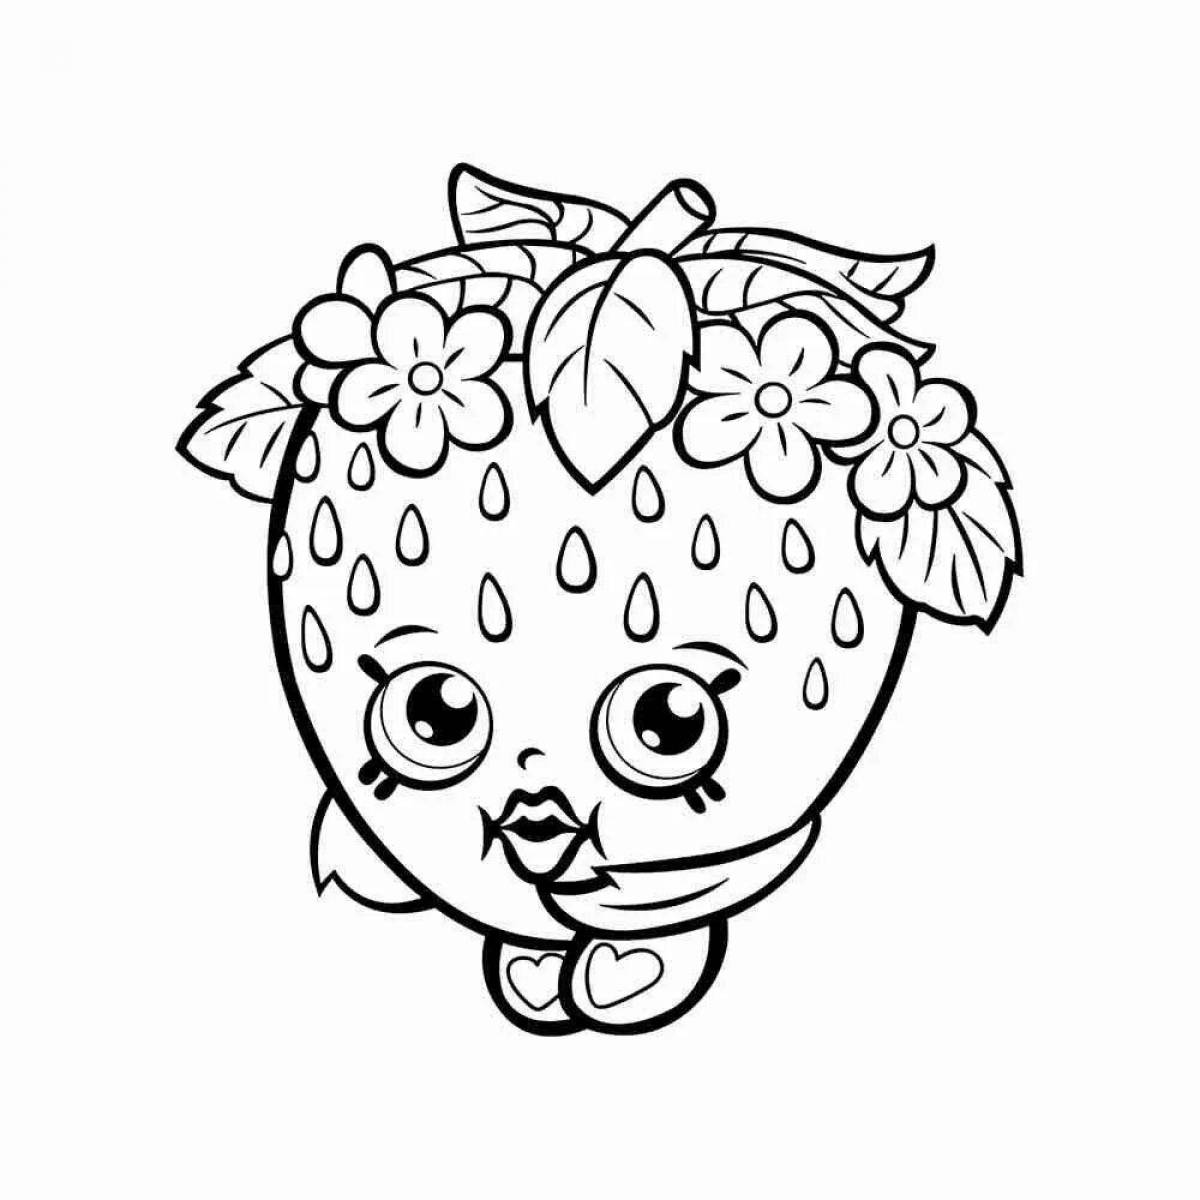 Hopkins playful coloring page